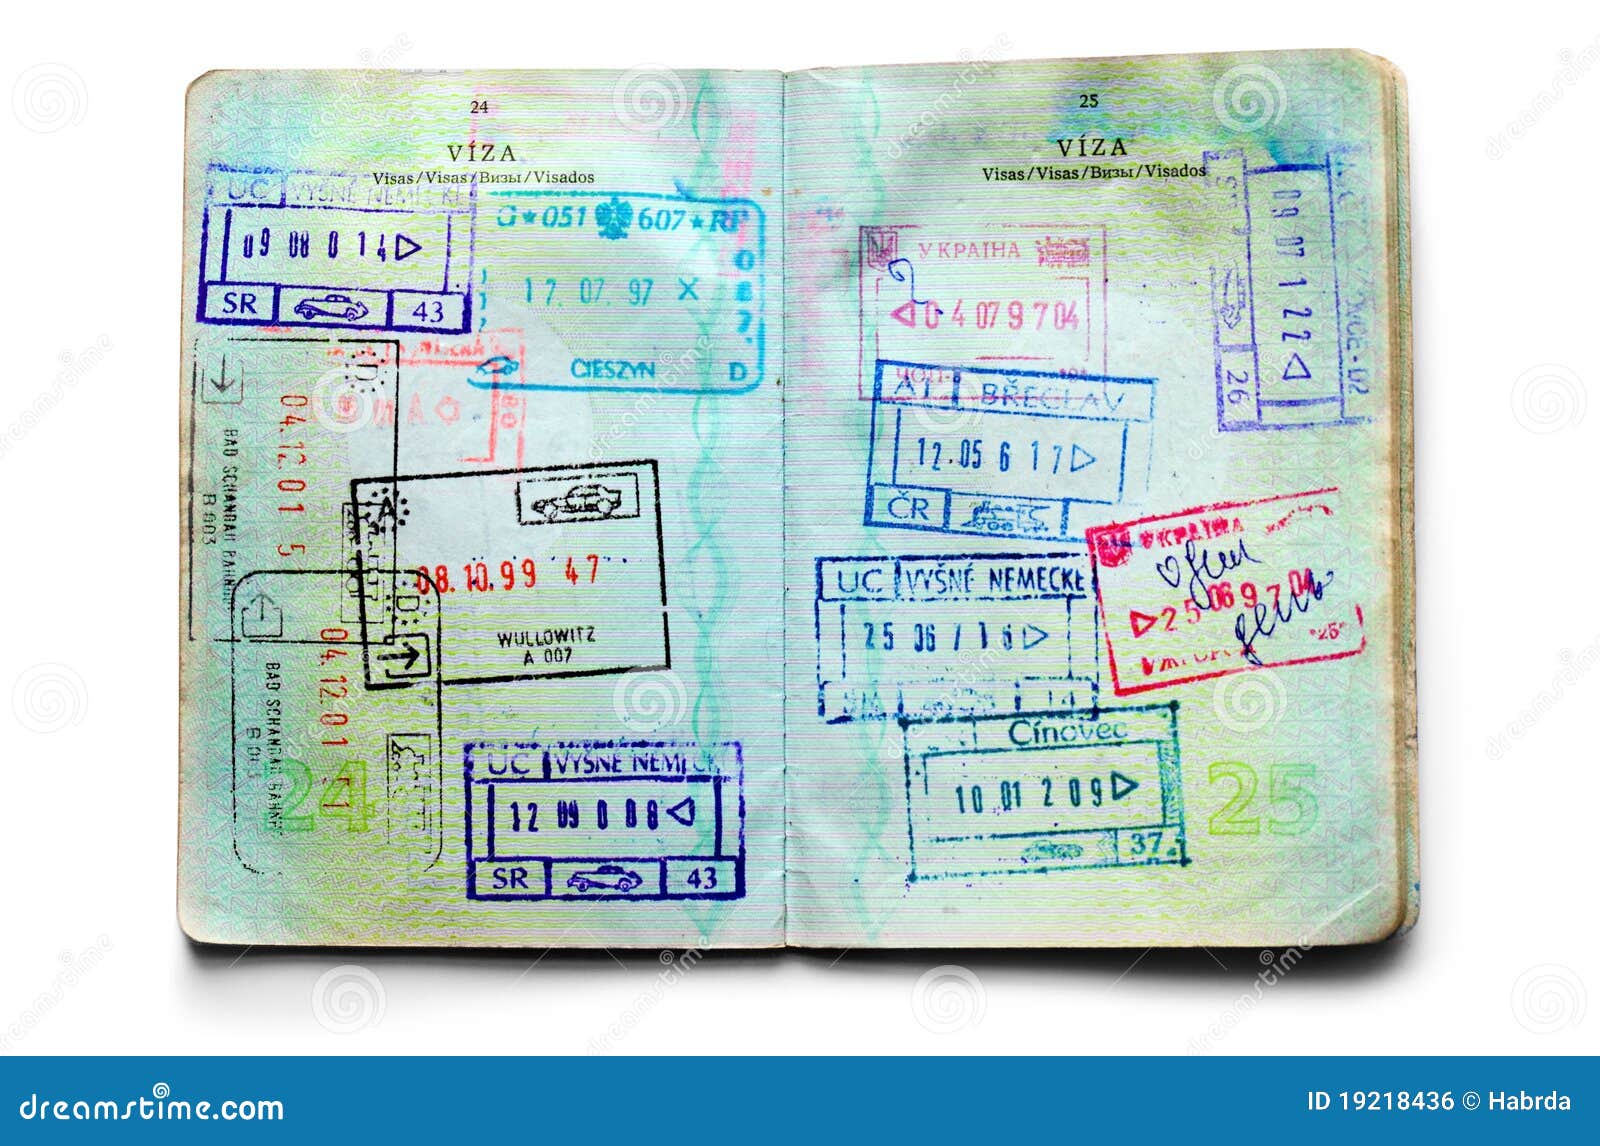 passports full of stamps